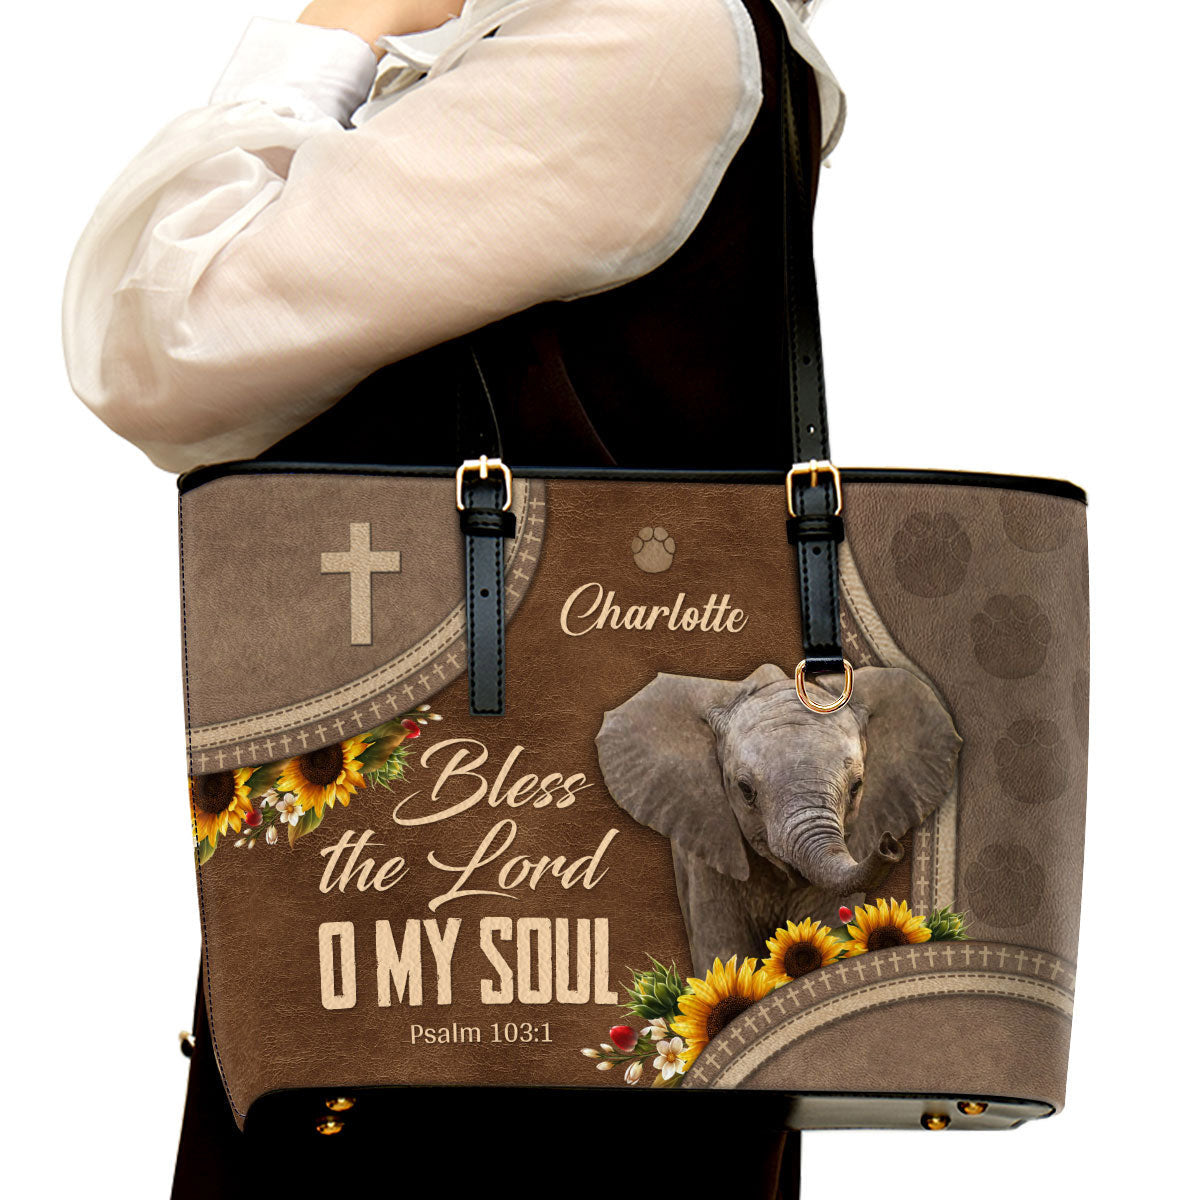 Bless The Lord O My Soul Personalized Large Leather Tote Bag - Christian Gifts For Women